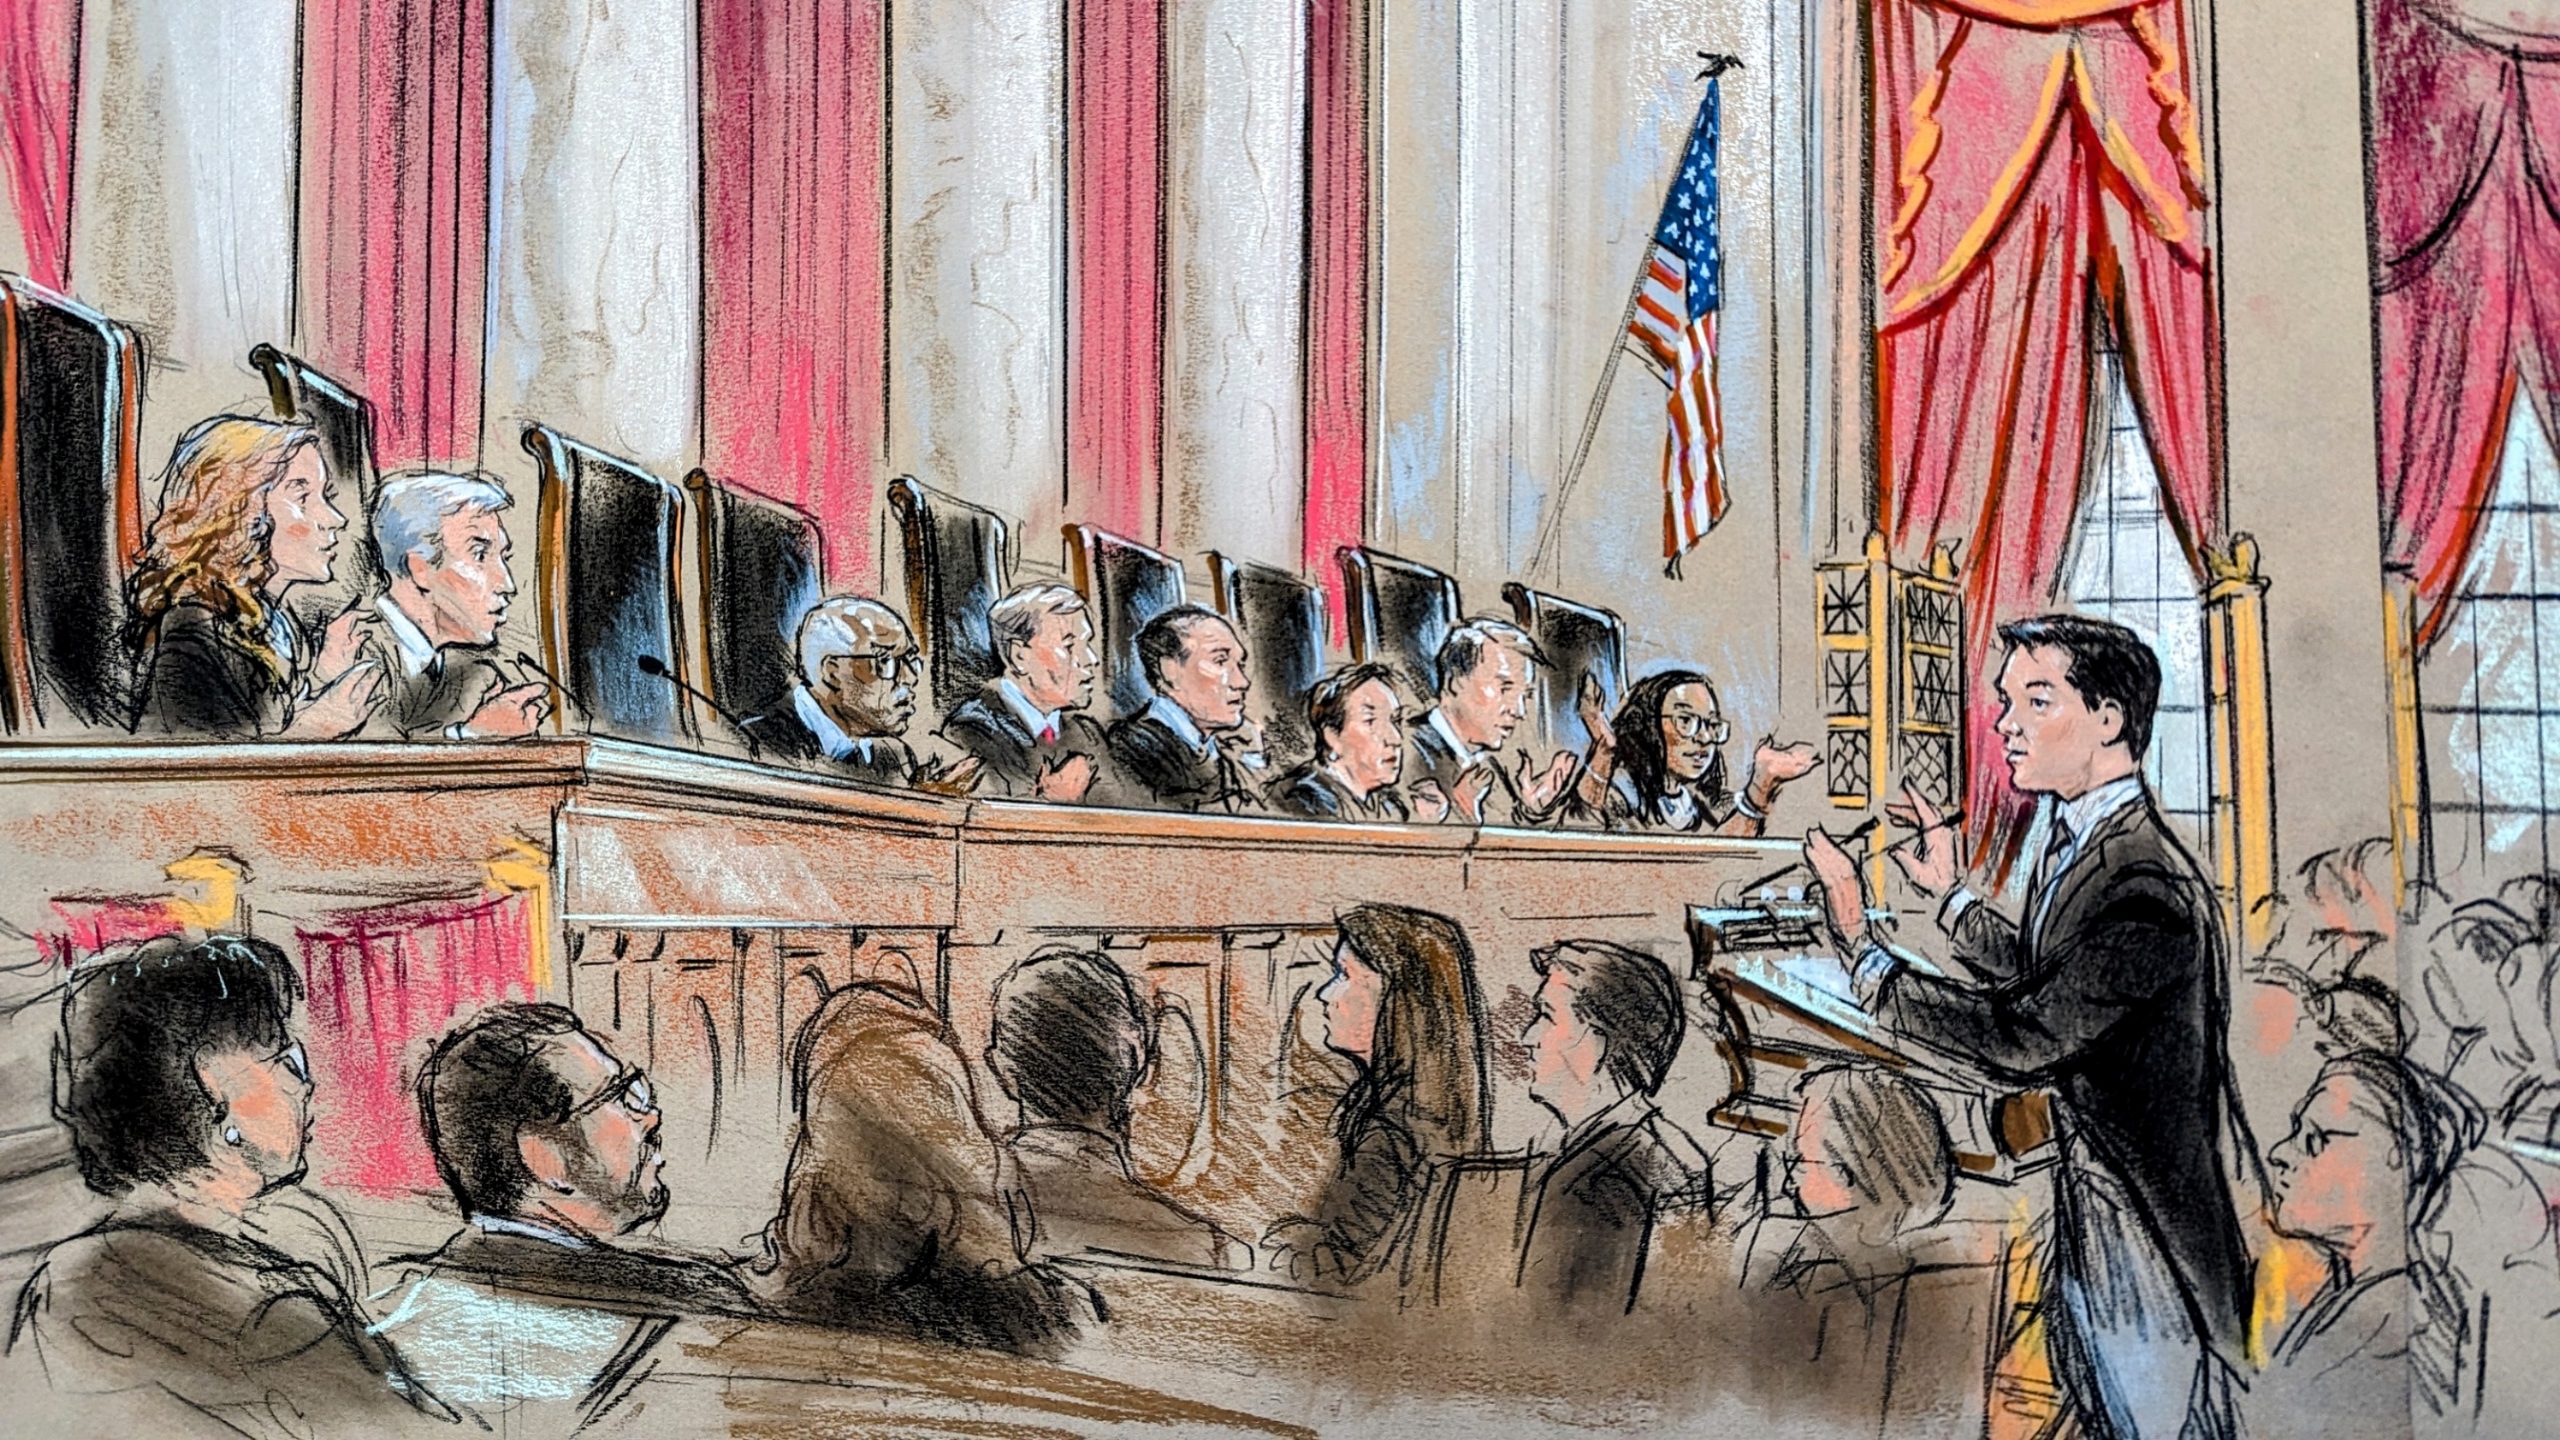 Sketch of man in a dark, long suit arguing before the justices. Justice Sotomayor's chair sits empty.